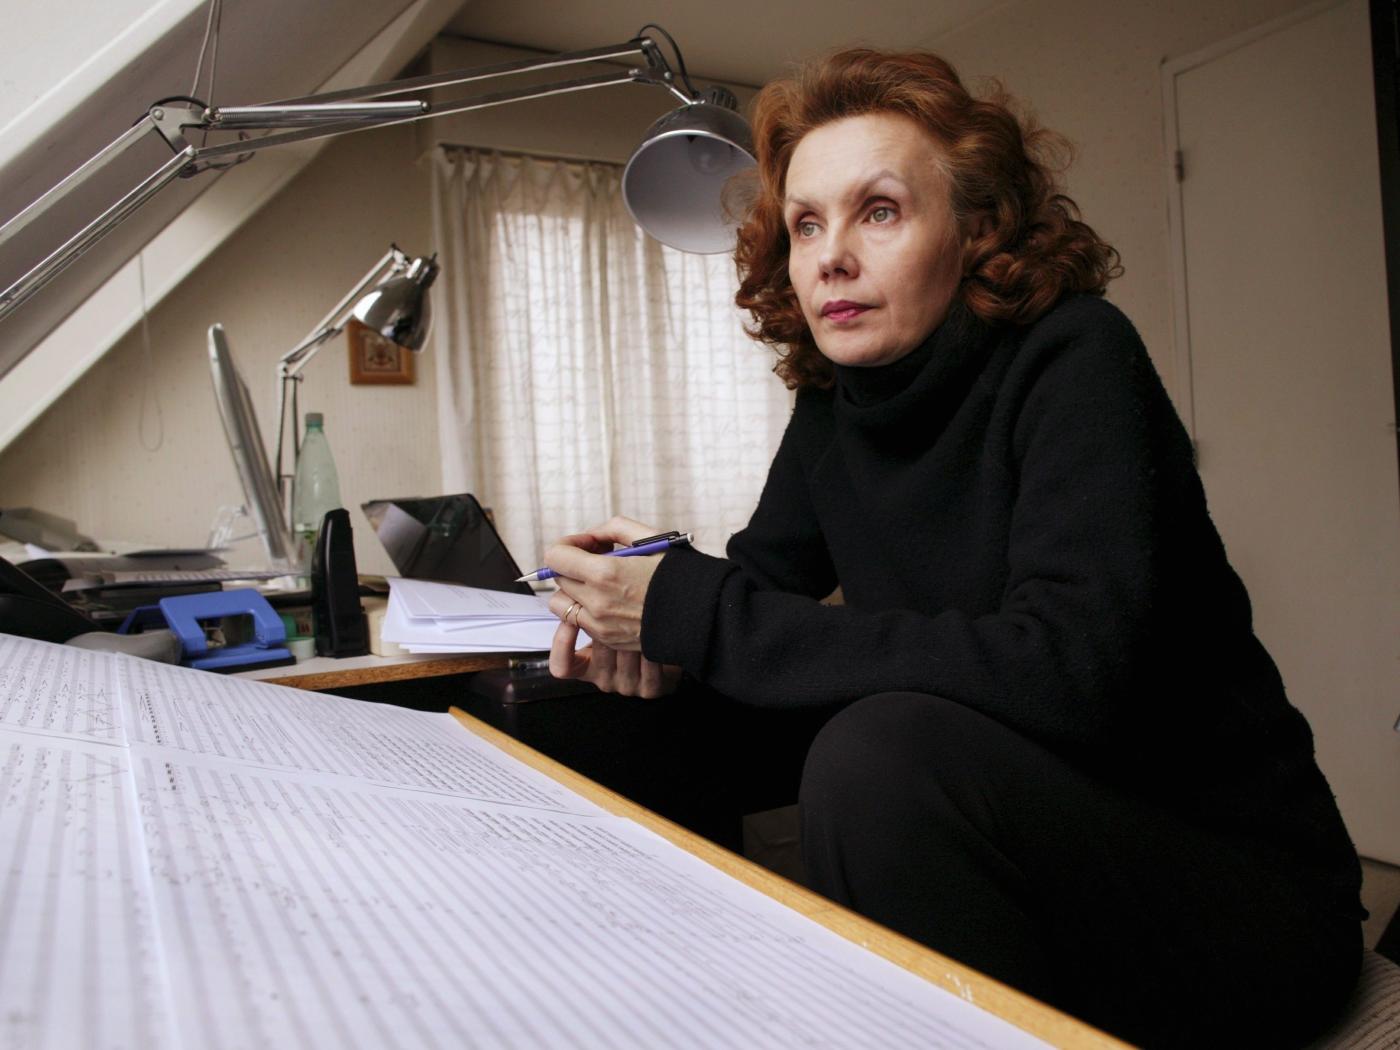 Finnish composer Kaija Saariaho was always searching for new timbres of instrumental sound.